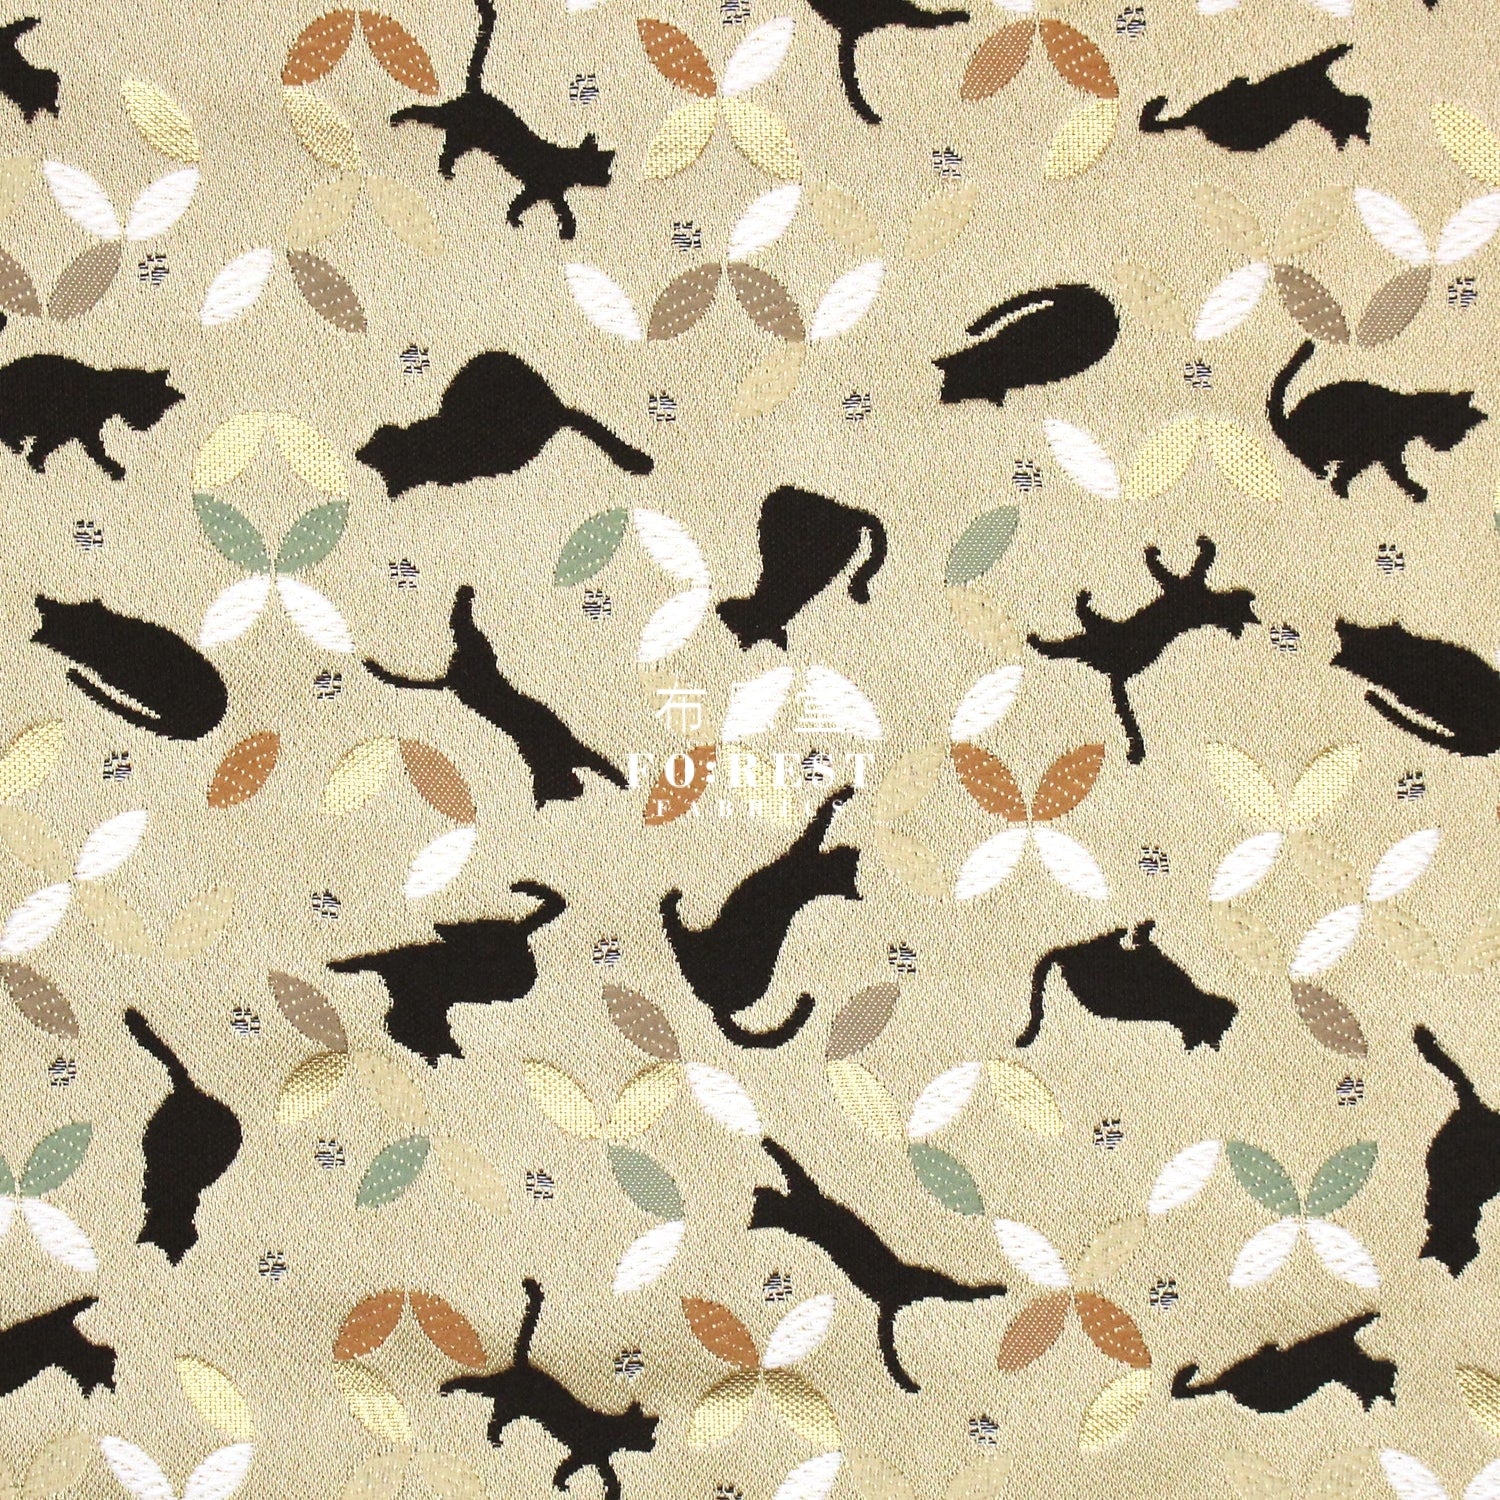 Gold Brocade - Shippo Cats Fabric Polyester